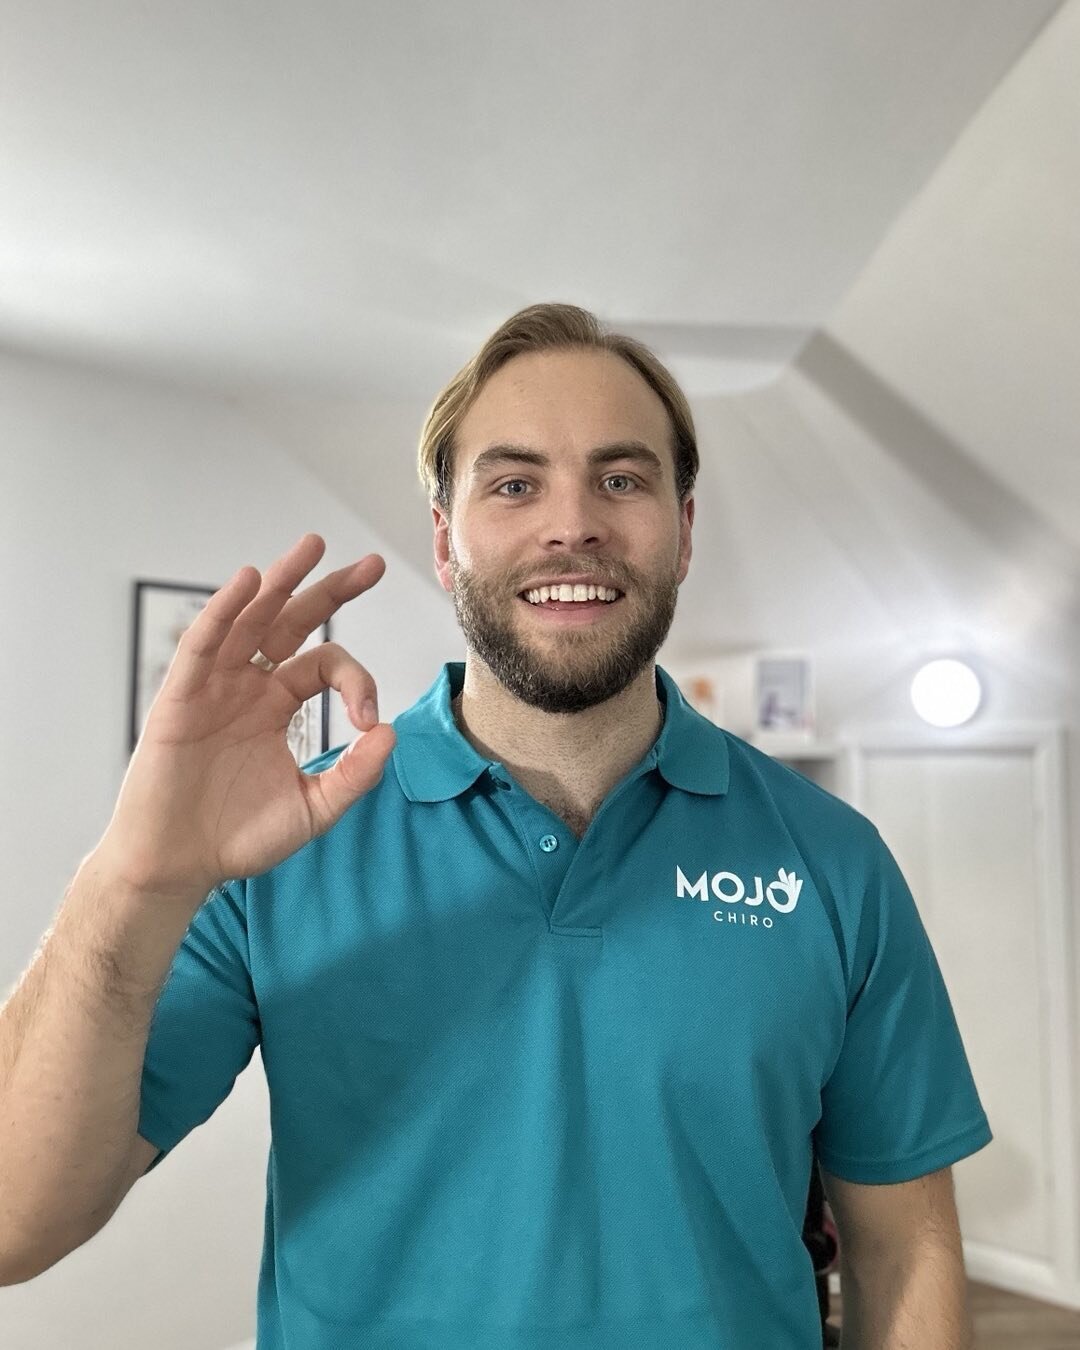 Hey there 👋 I am Harvey, doctor of Chiropractic and the founder of Mojo Chiro! 

I grew up in Bournemouth, only 5 minutes from the Chiropractic college I went on to study at and obtain my degree from! some may call it luck, I call it fate! ✨ 

I lov